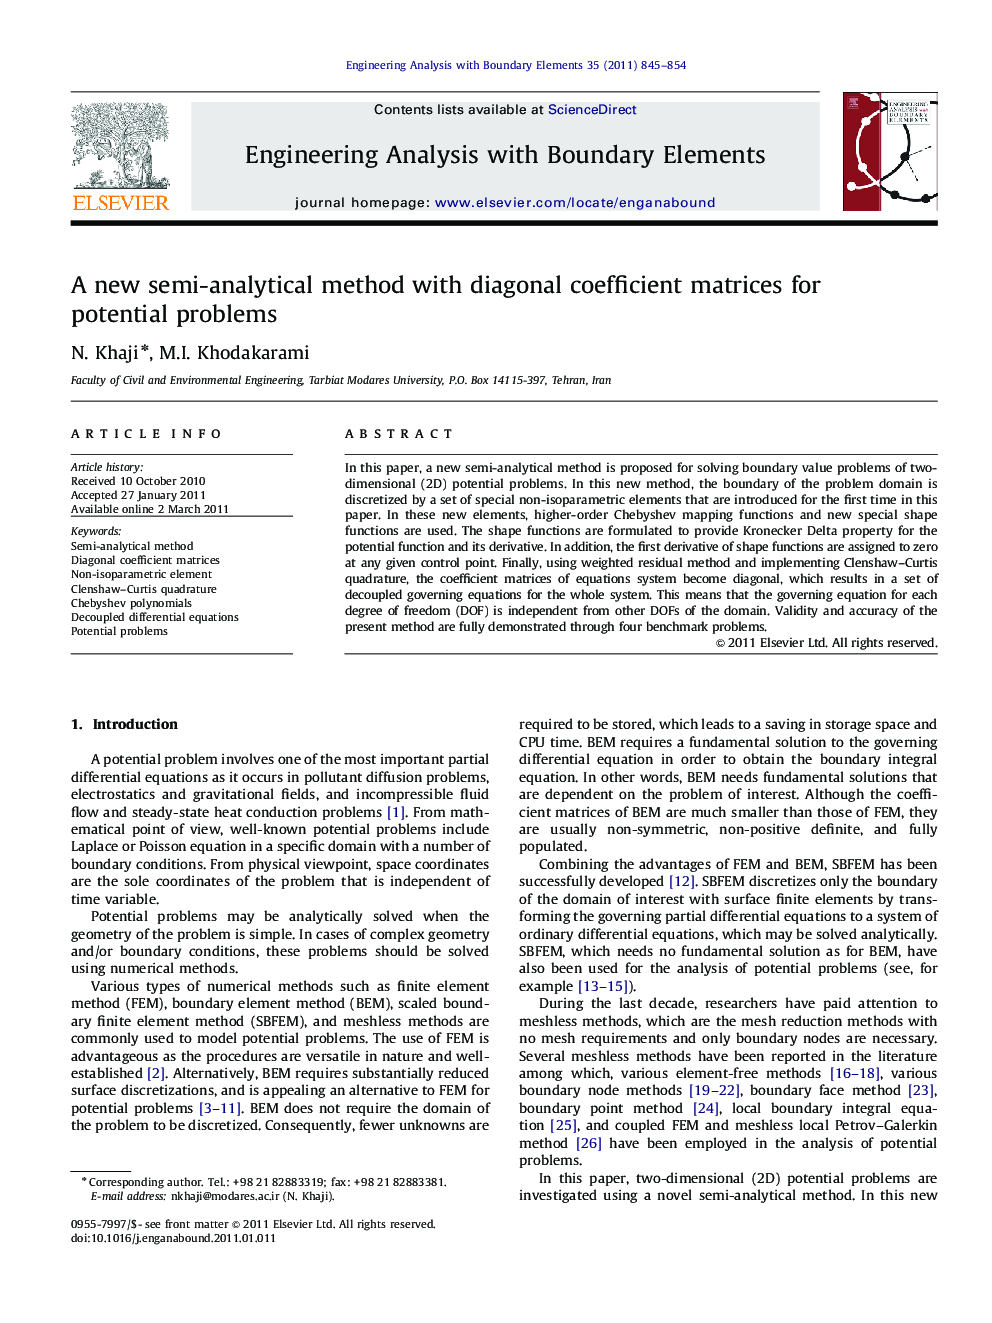 A new semi-analytical method with diagonal coefficient matrices for potential problems